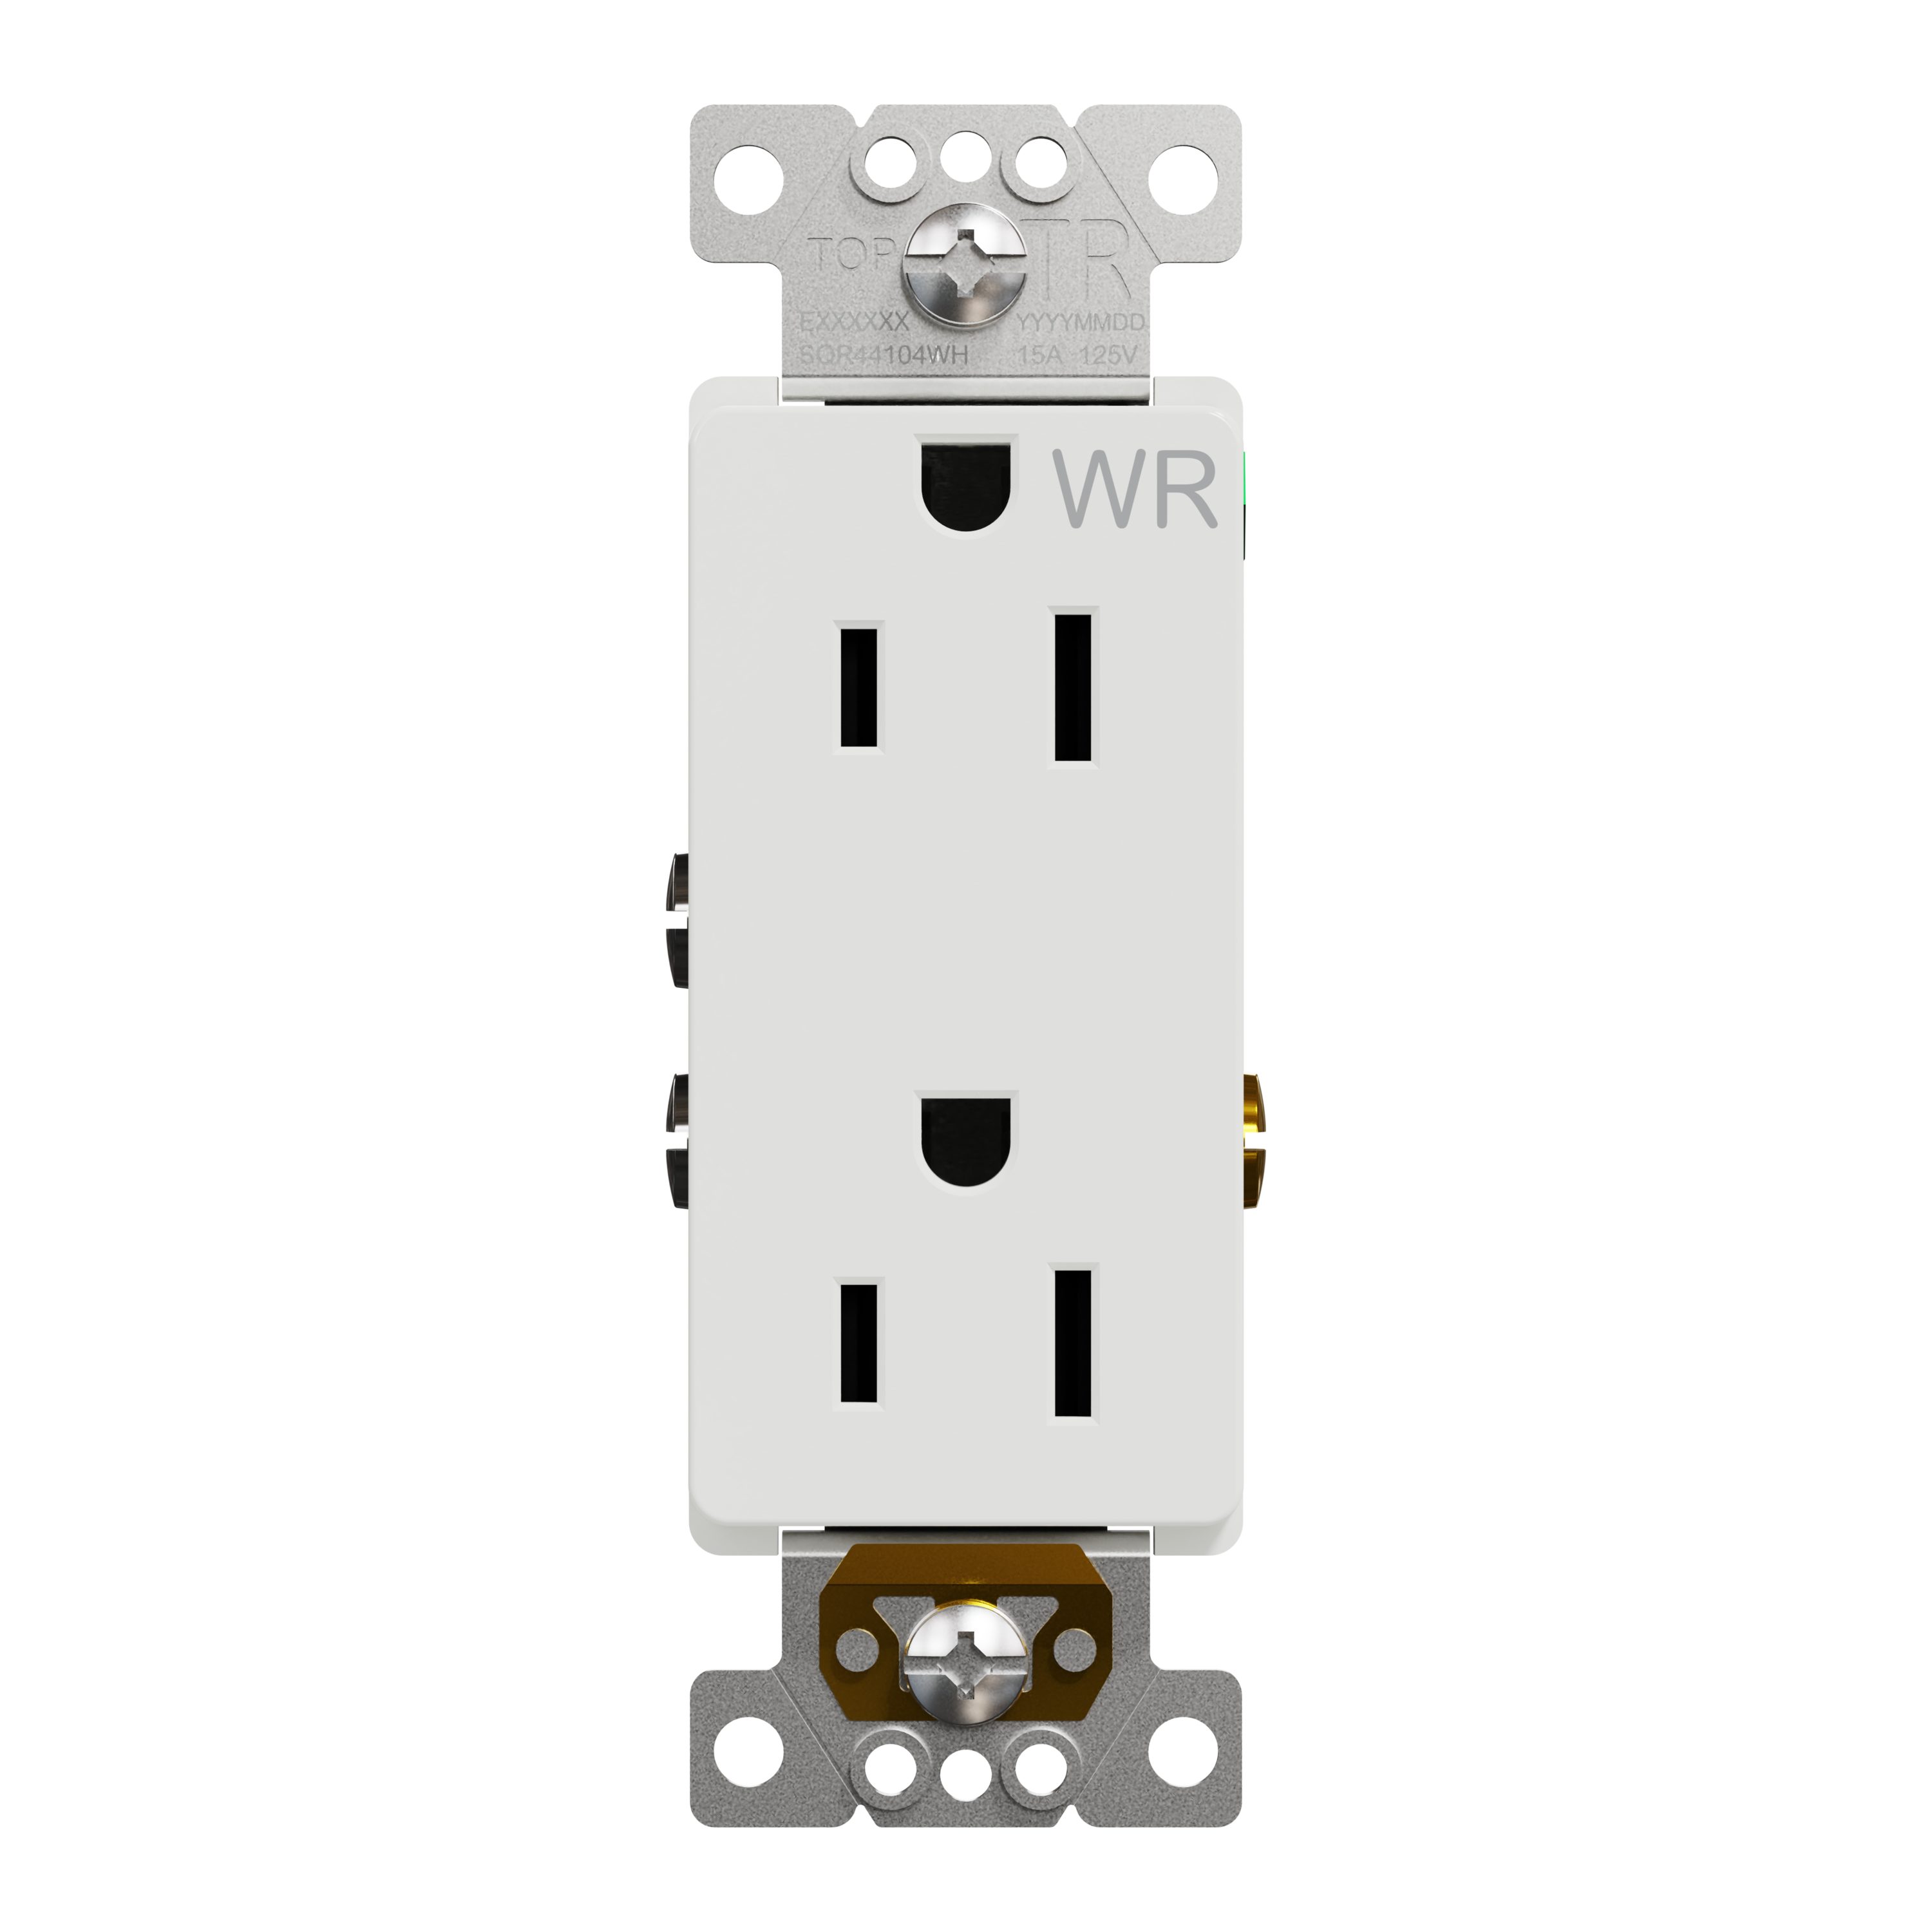 15A Amp Decora Tamper Resistant Child Safety Outlet Plug TR w/ Wall Plate White 